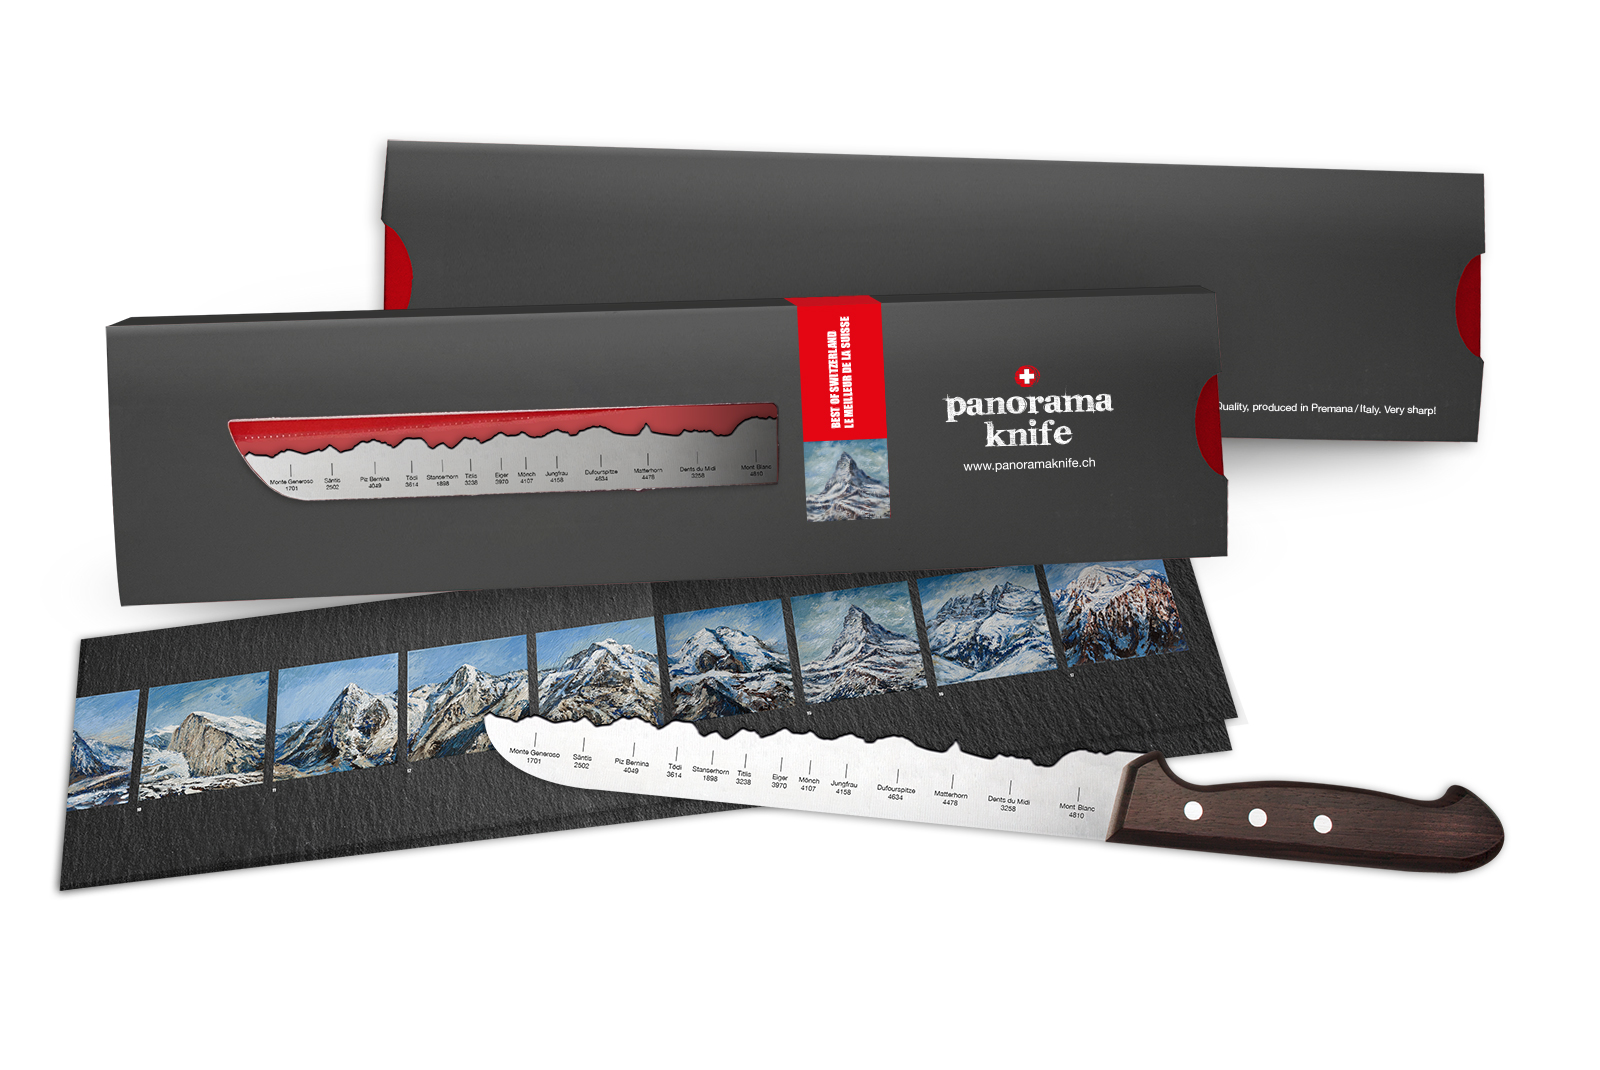 PanoramaKnife - Not just a knife